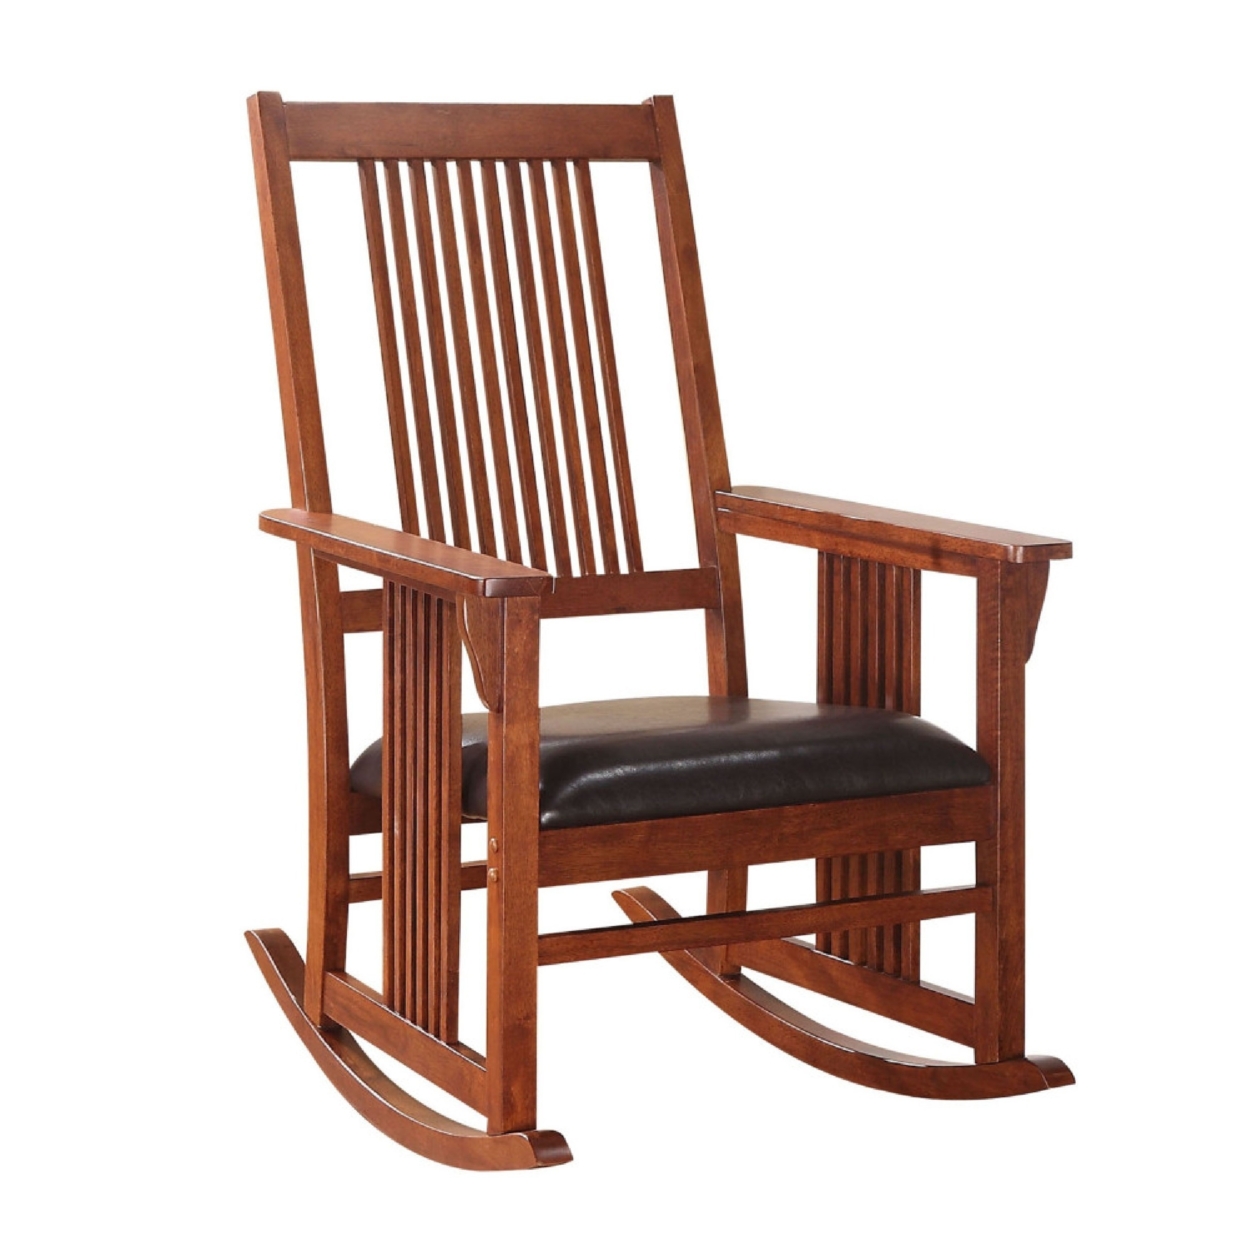 Traditional Style Wooden Rocking Chair With Slat Back, Brown- Saltoro Sherpi